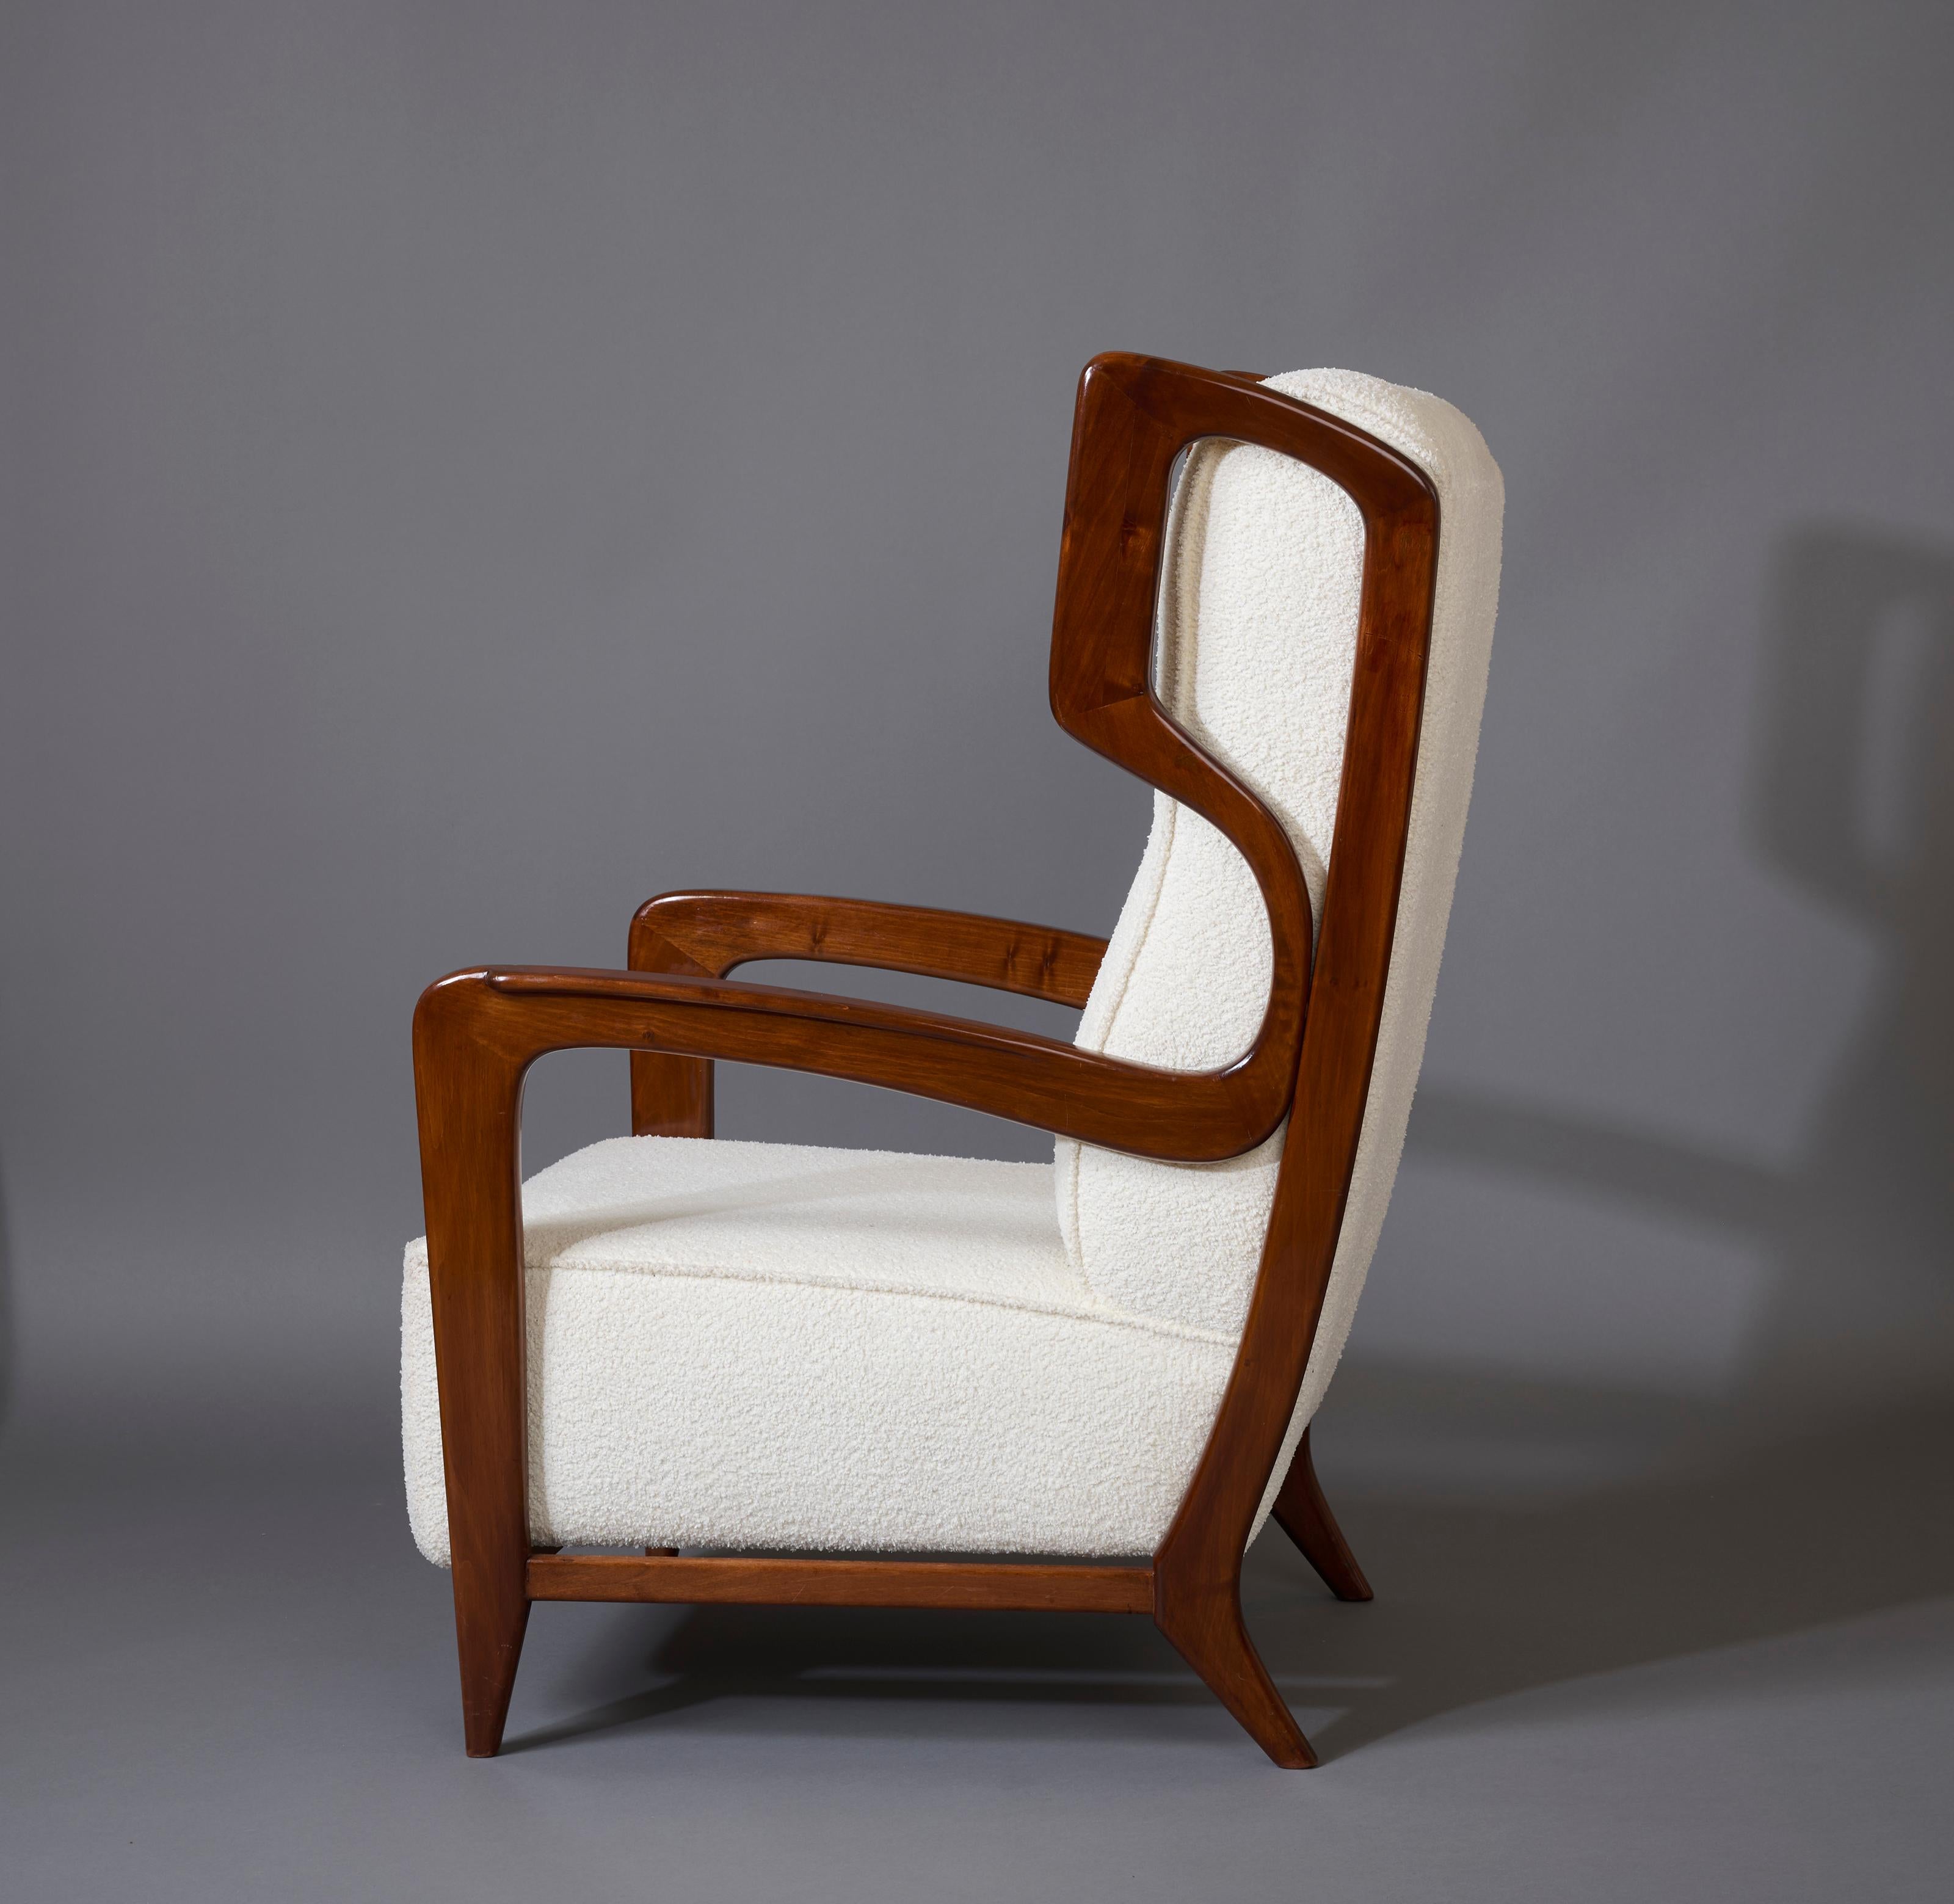 Gio Ponti, Exceptional Pair of Rare Wingback Armchairs in Walnut, Italy, 1940s For Sale 9